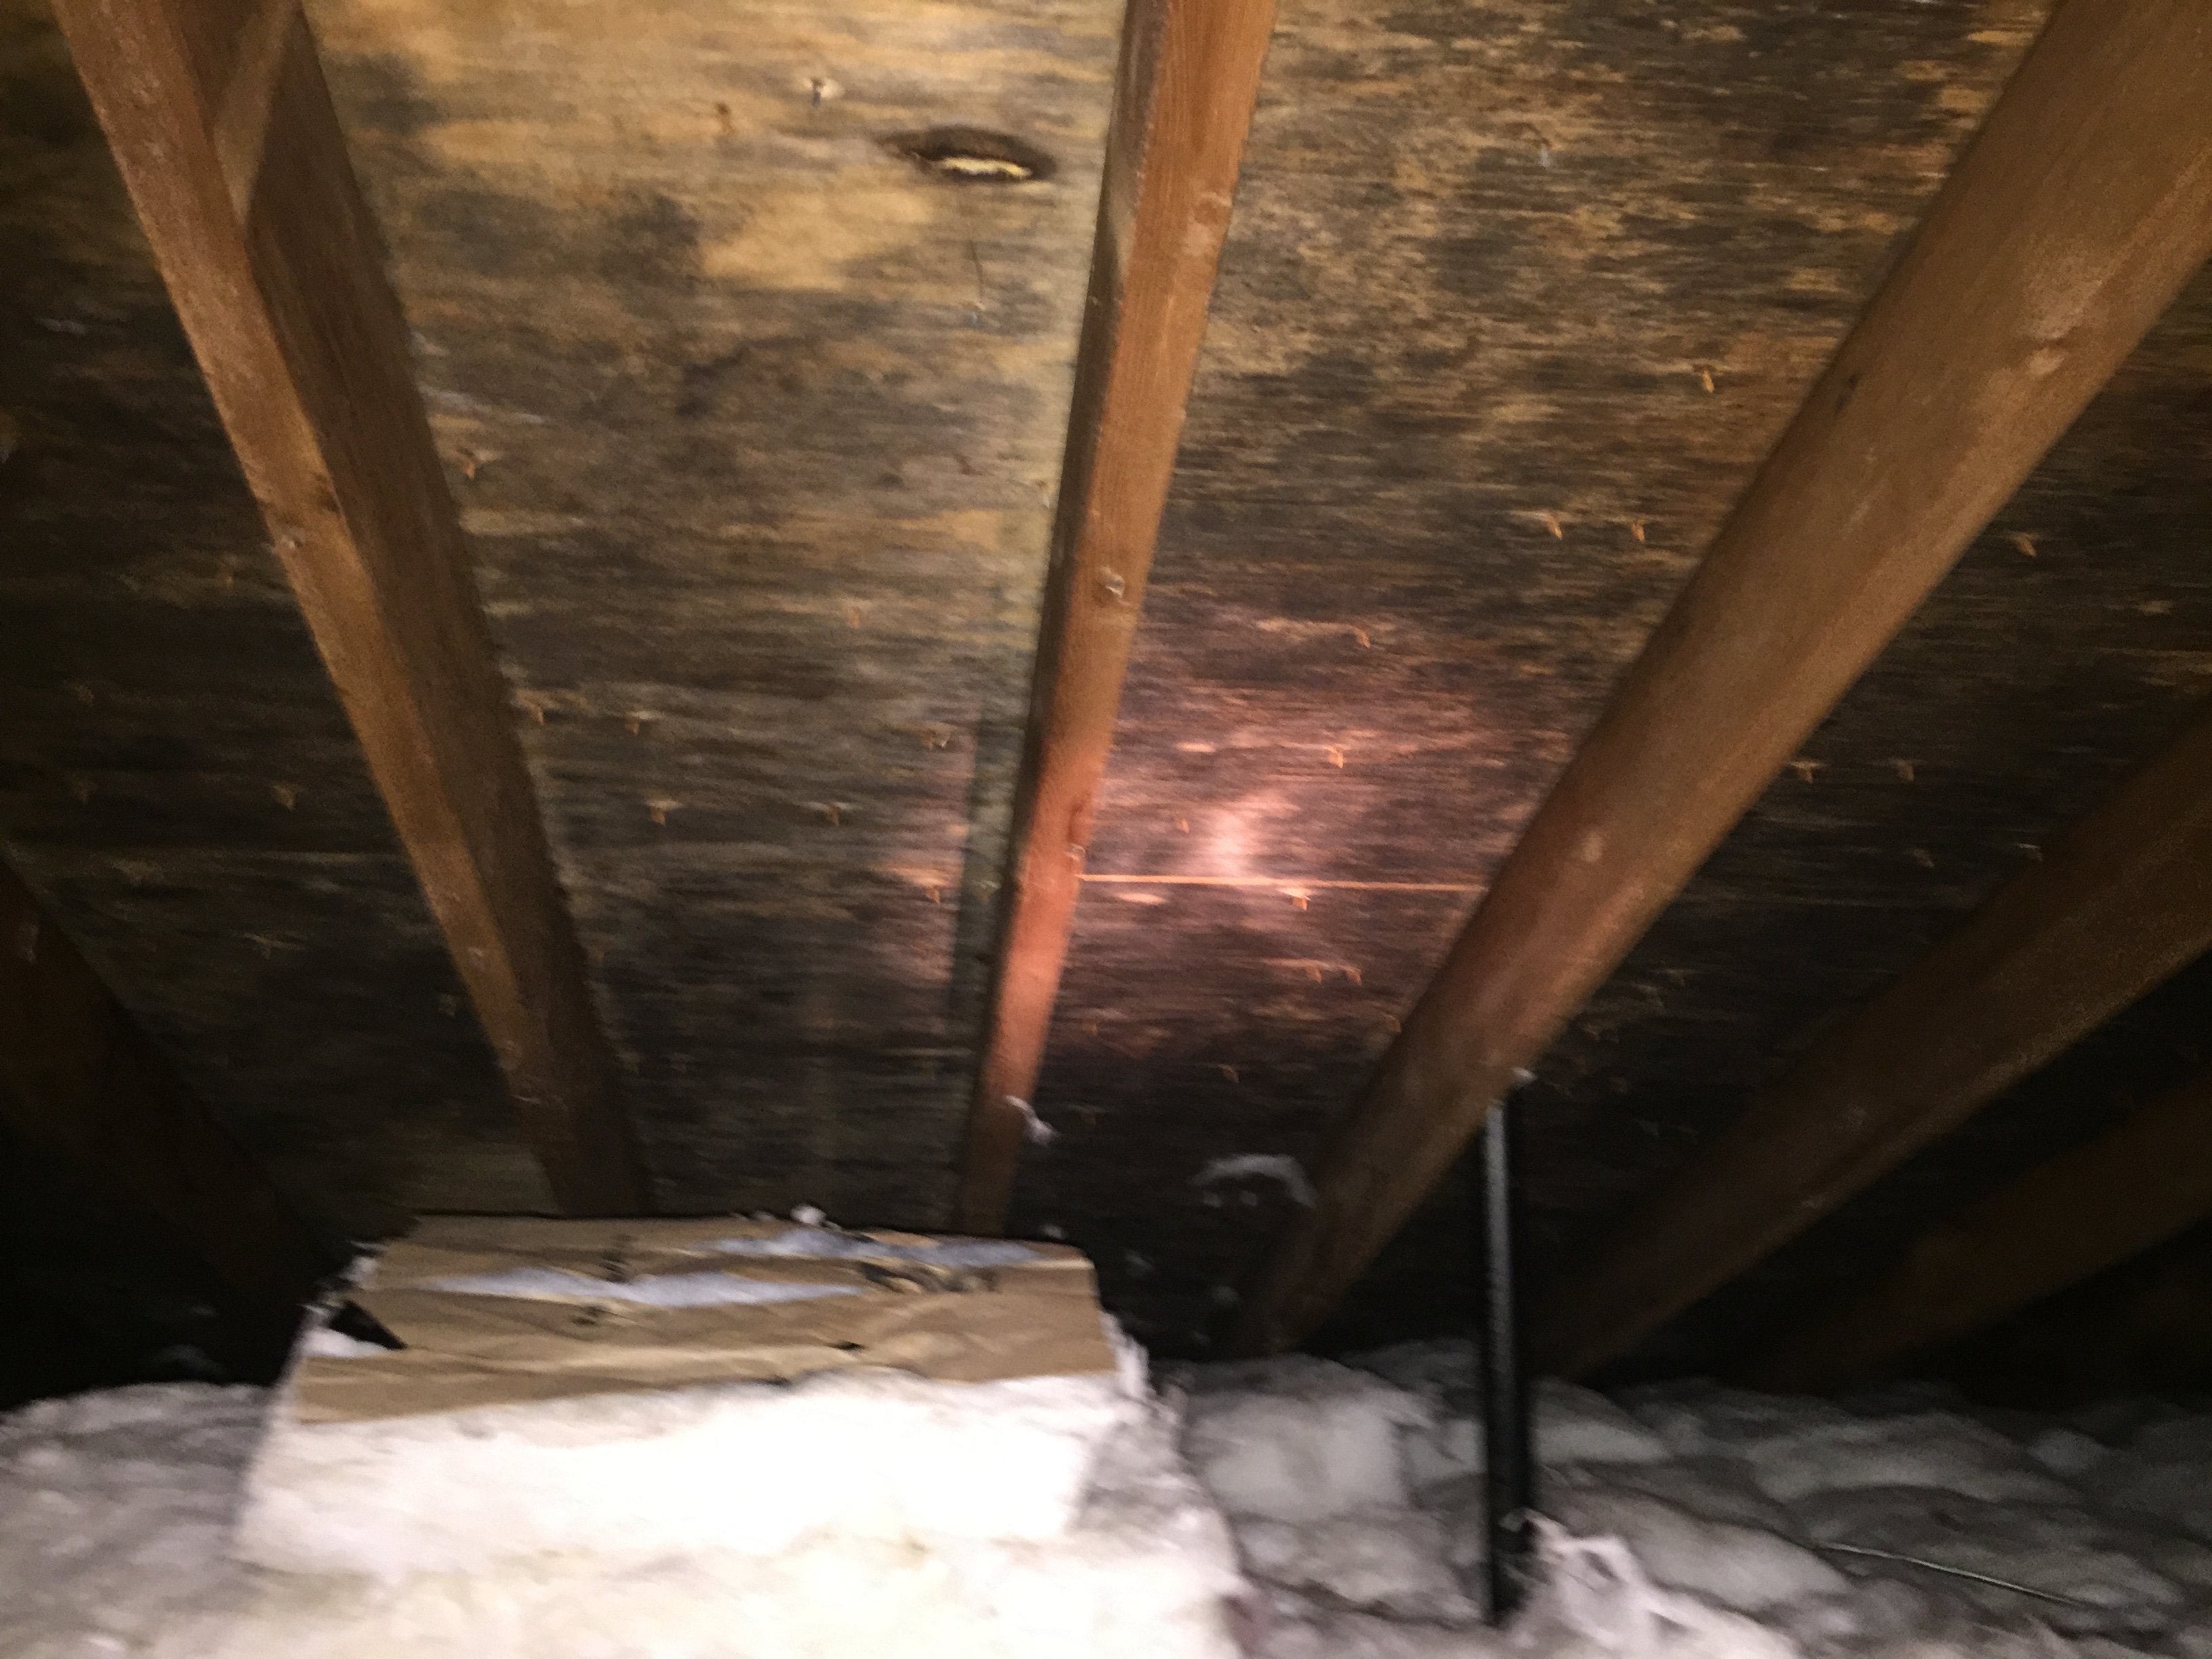 mold commonly grows in attics